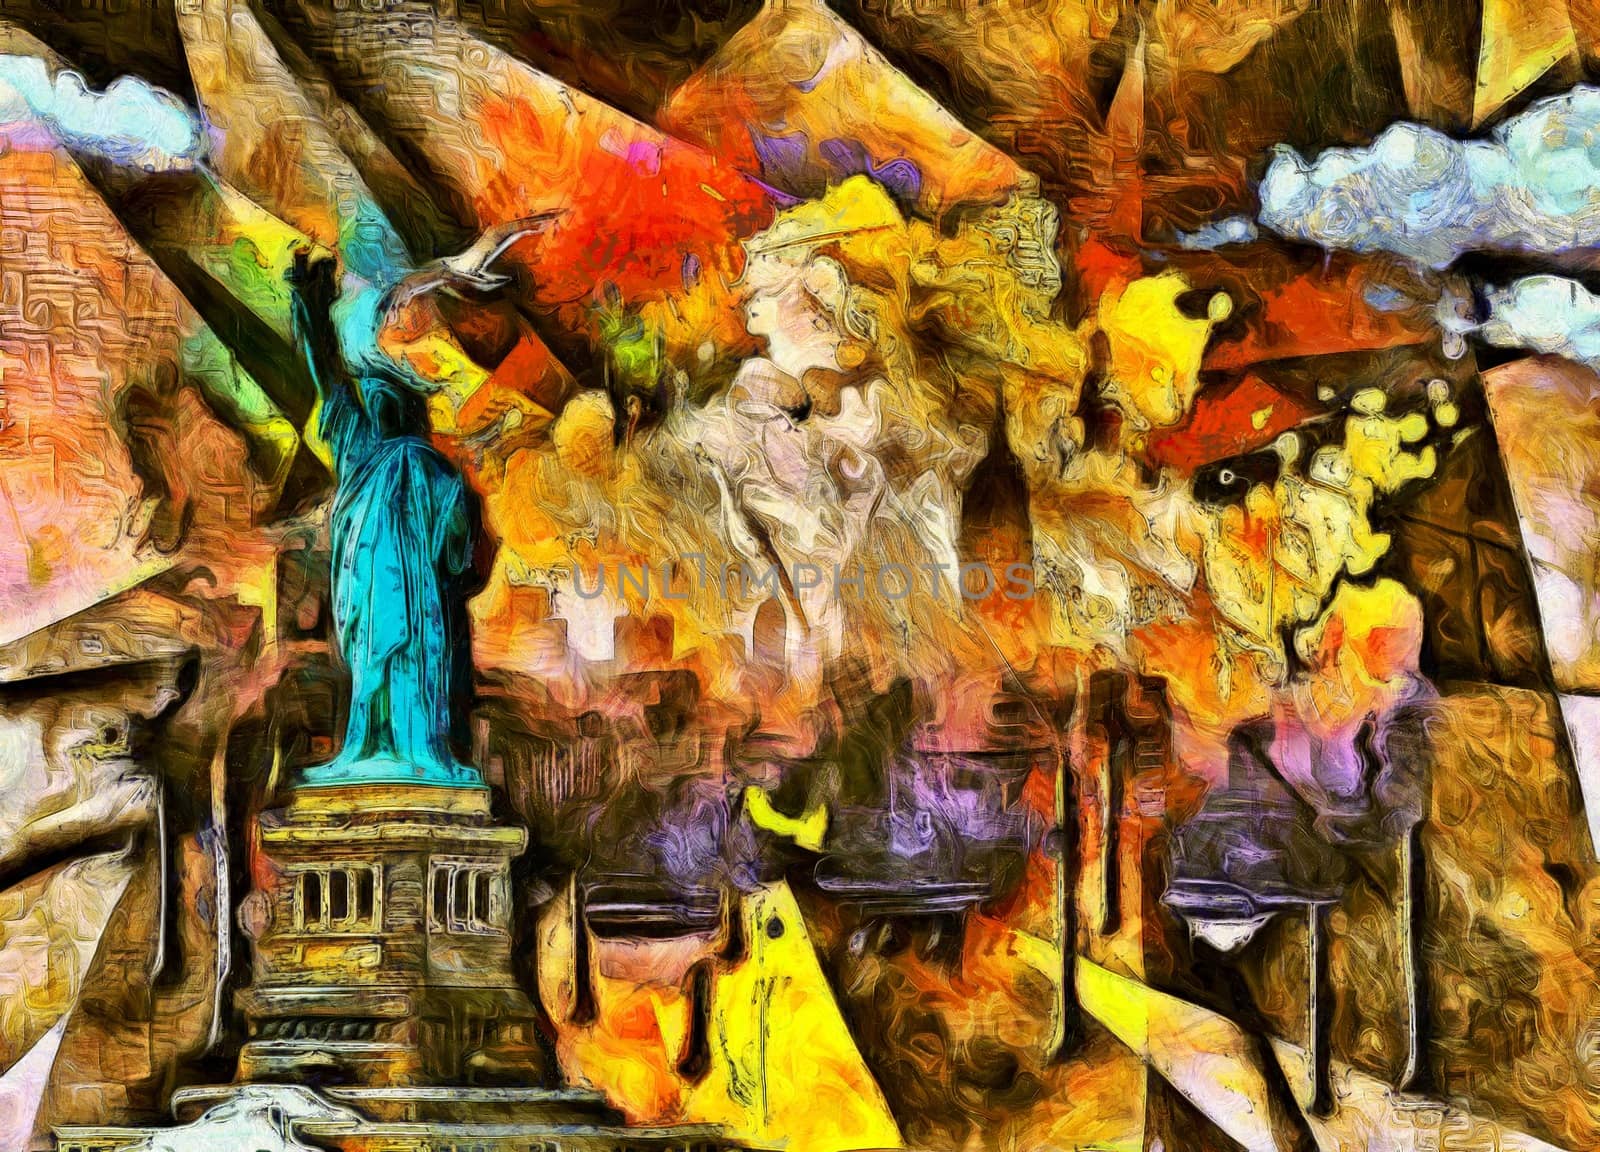 Statue of Liberty by applesstock